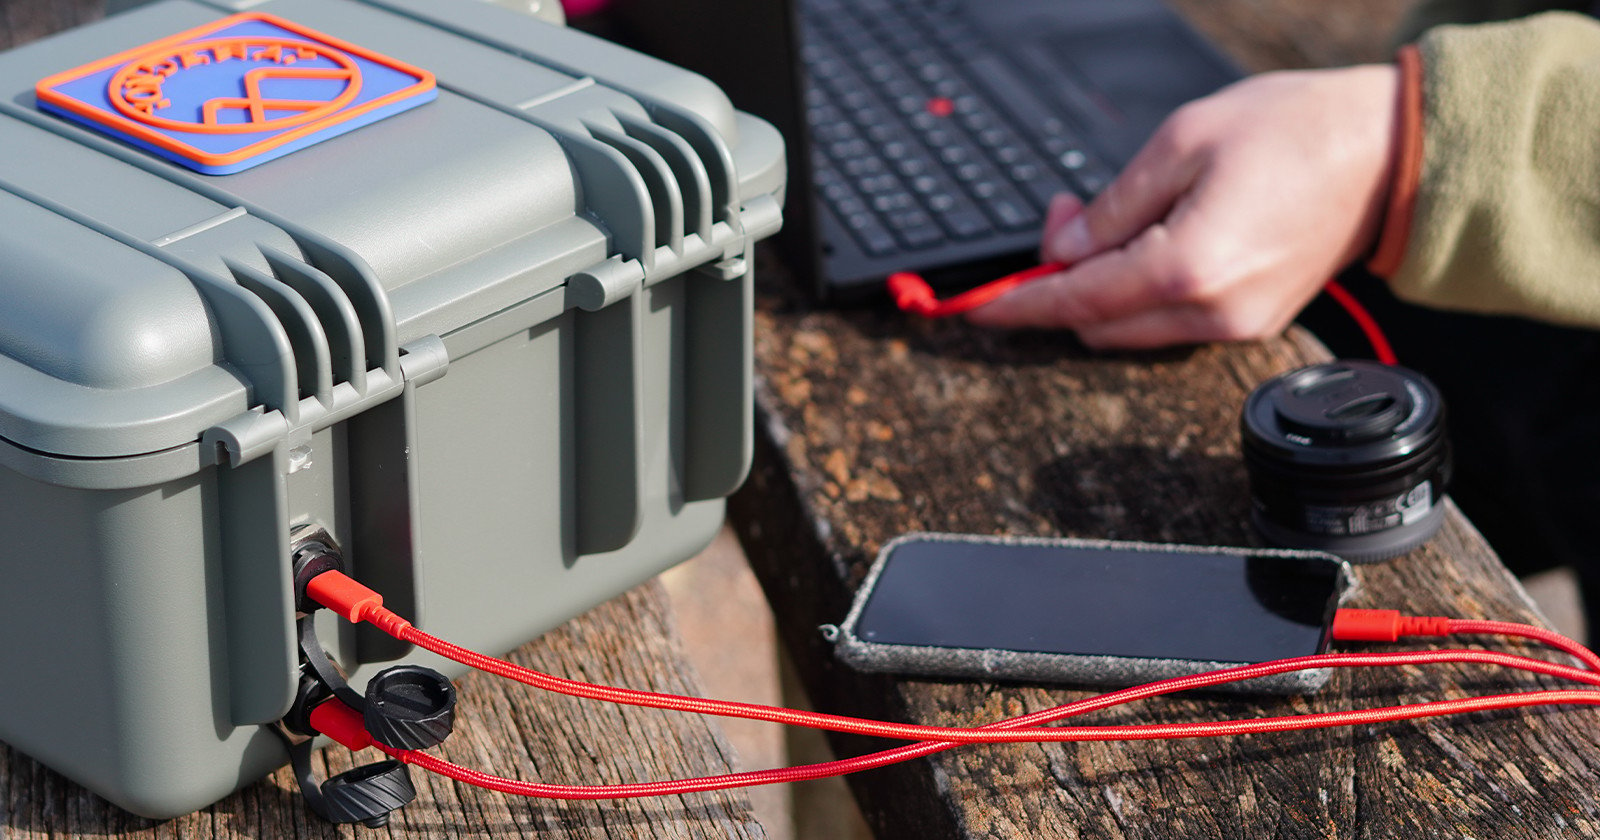 The Powchell Charger Both Powers and Protects Your Camera Gear